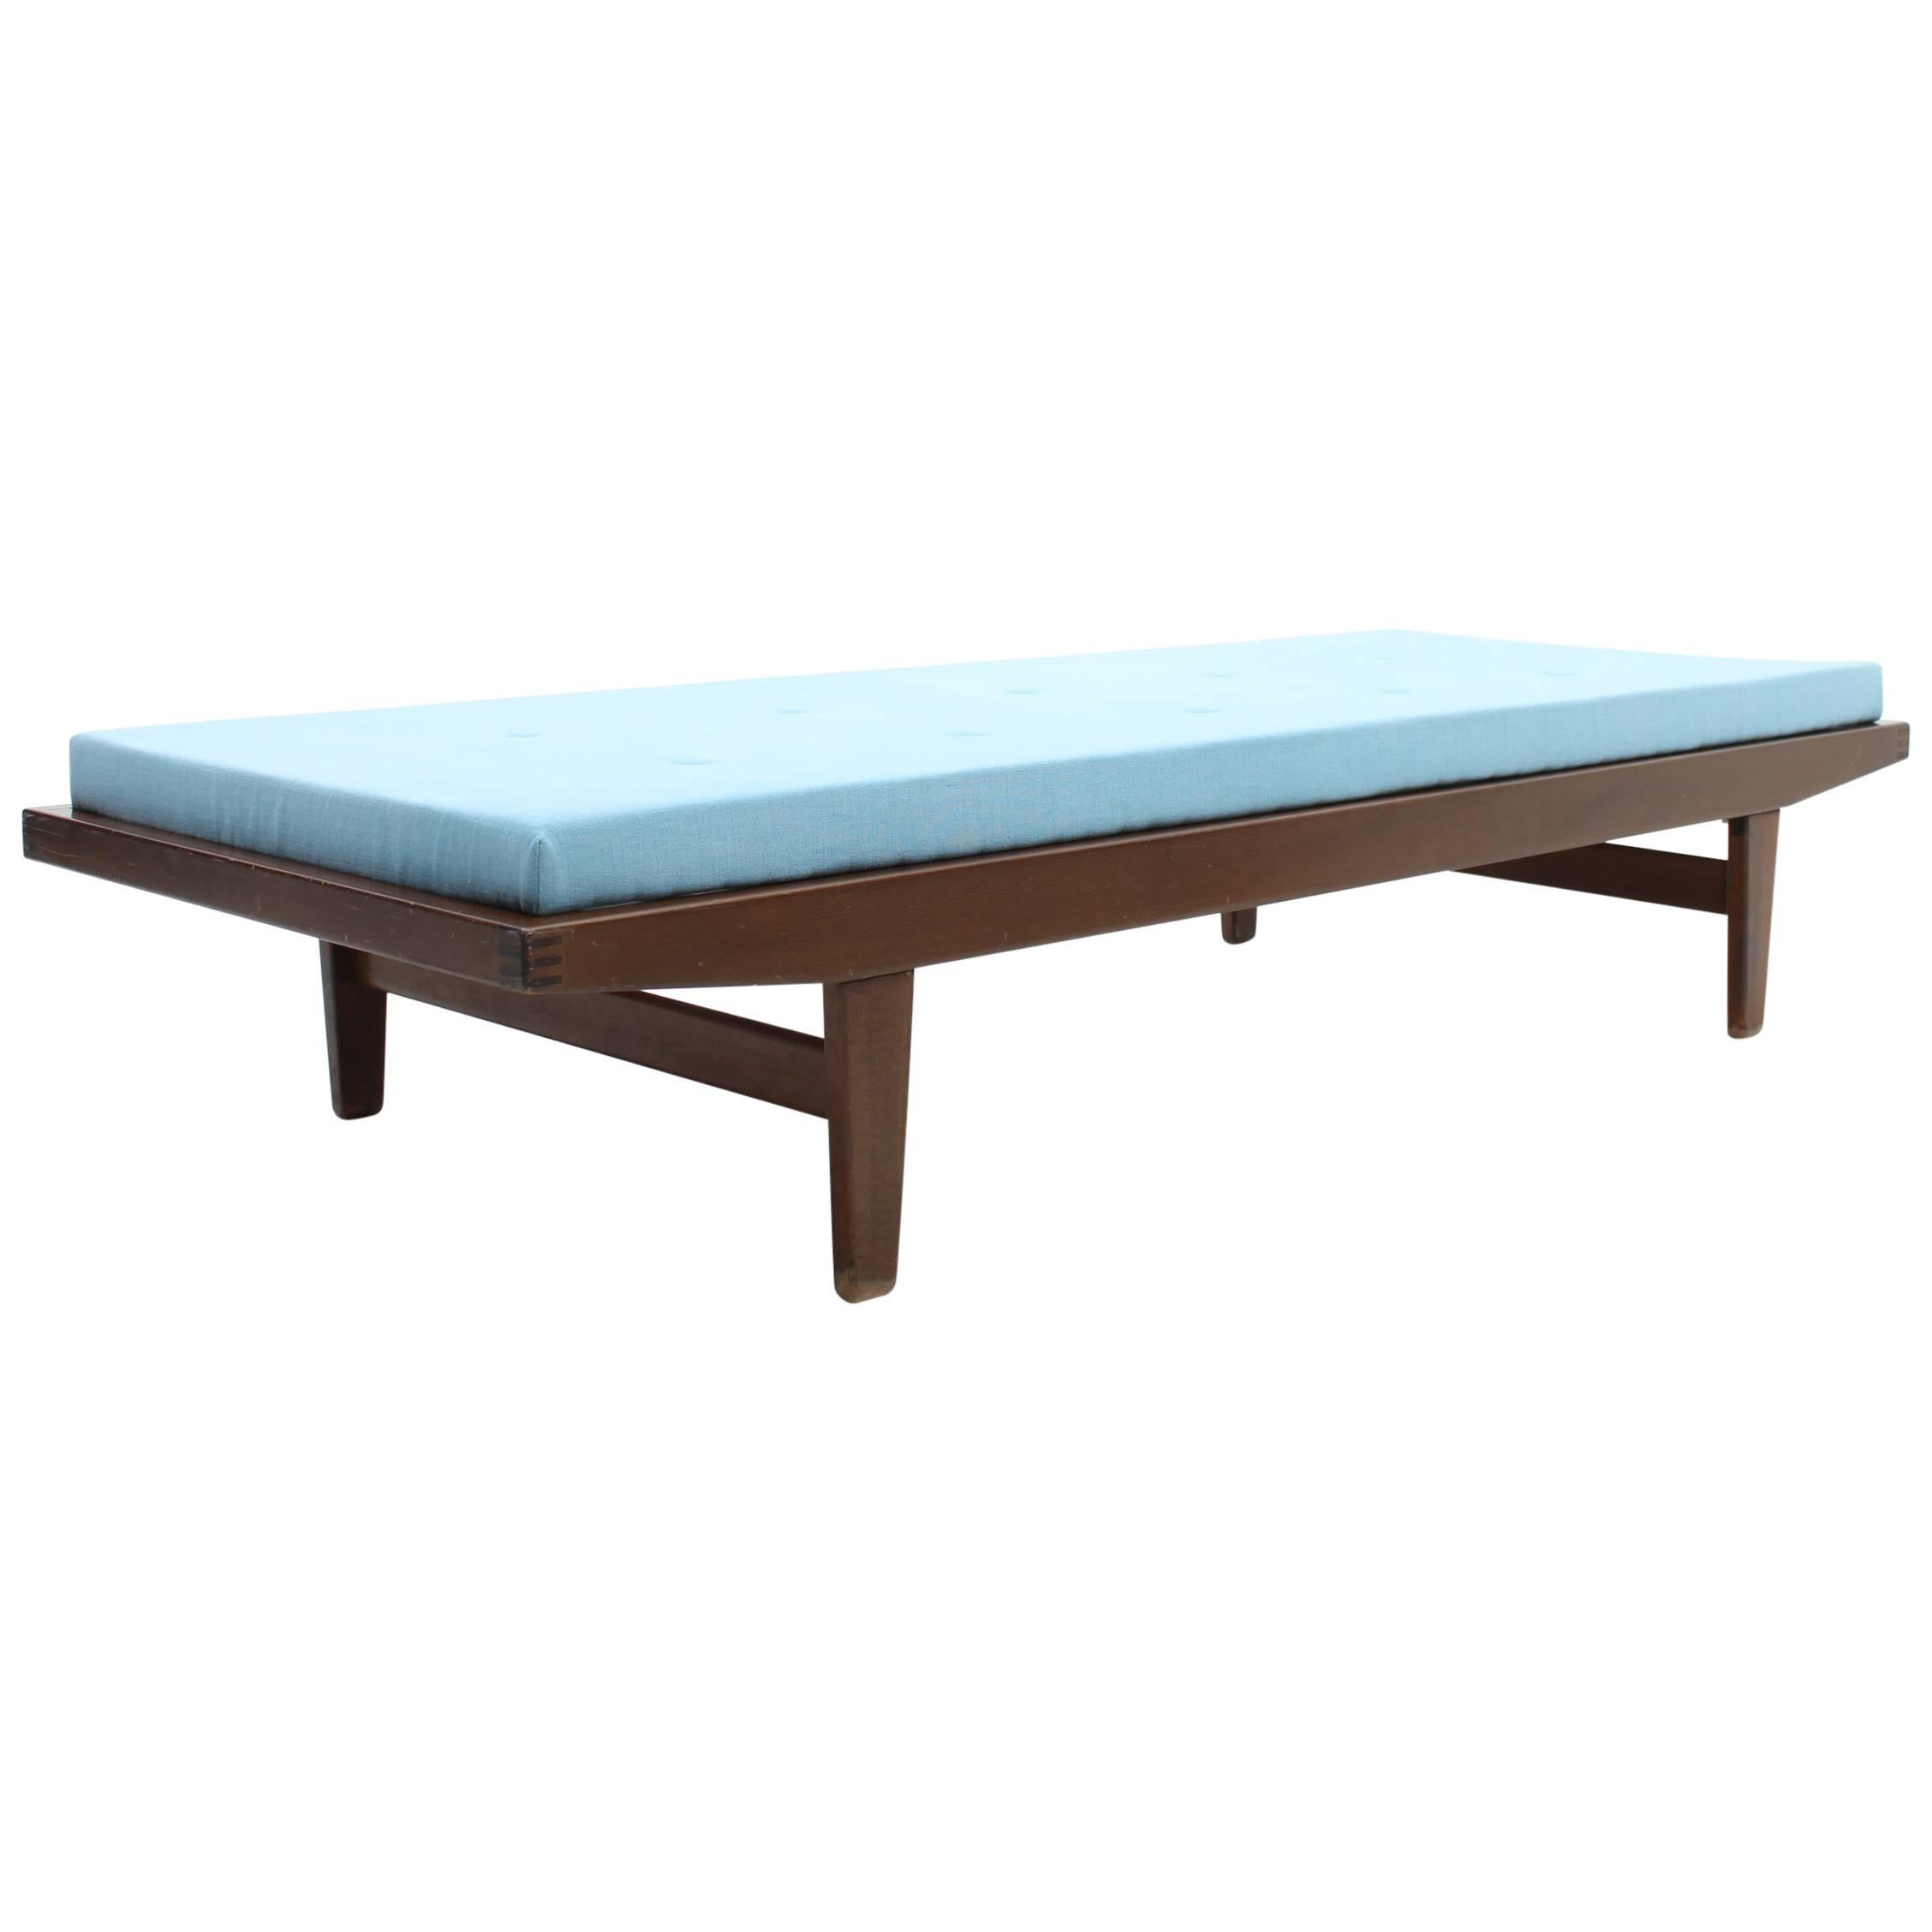 Light Blue and Oak Daybed Designed by Poul Volther for Illums Bolighus For Sale